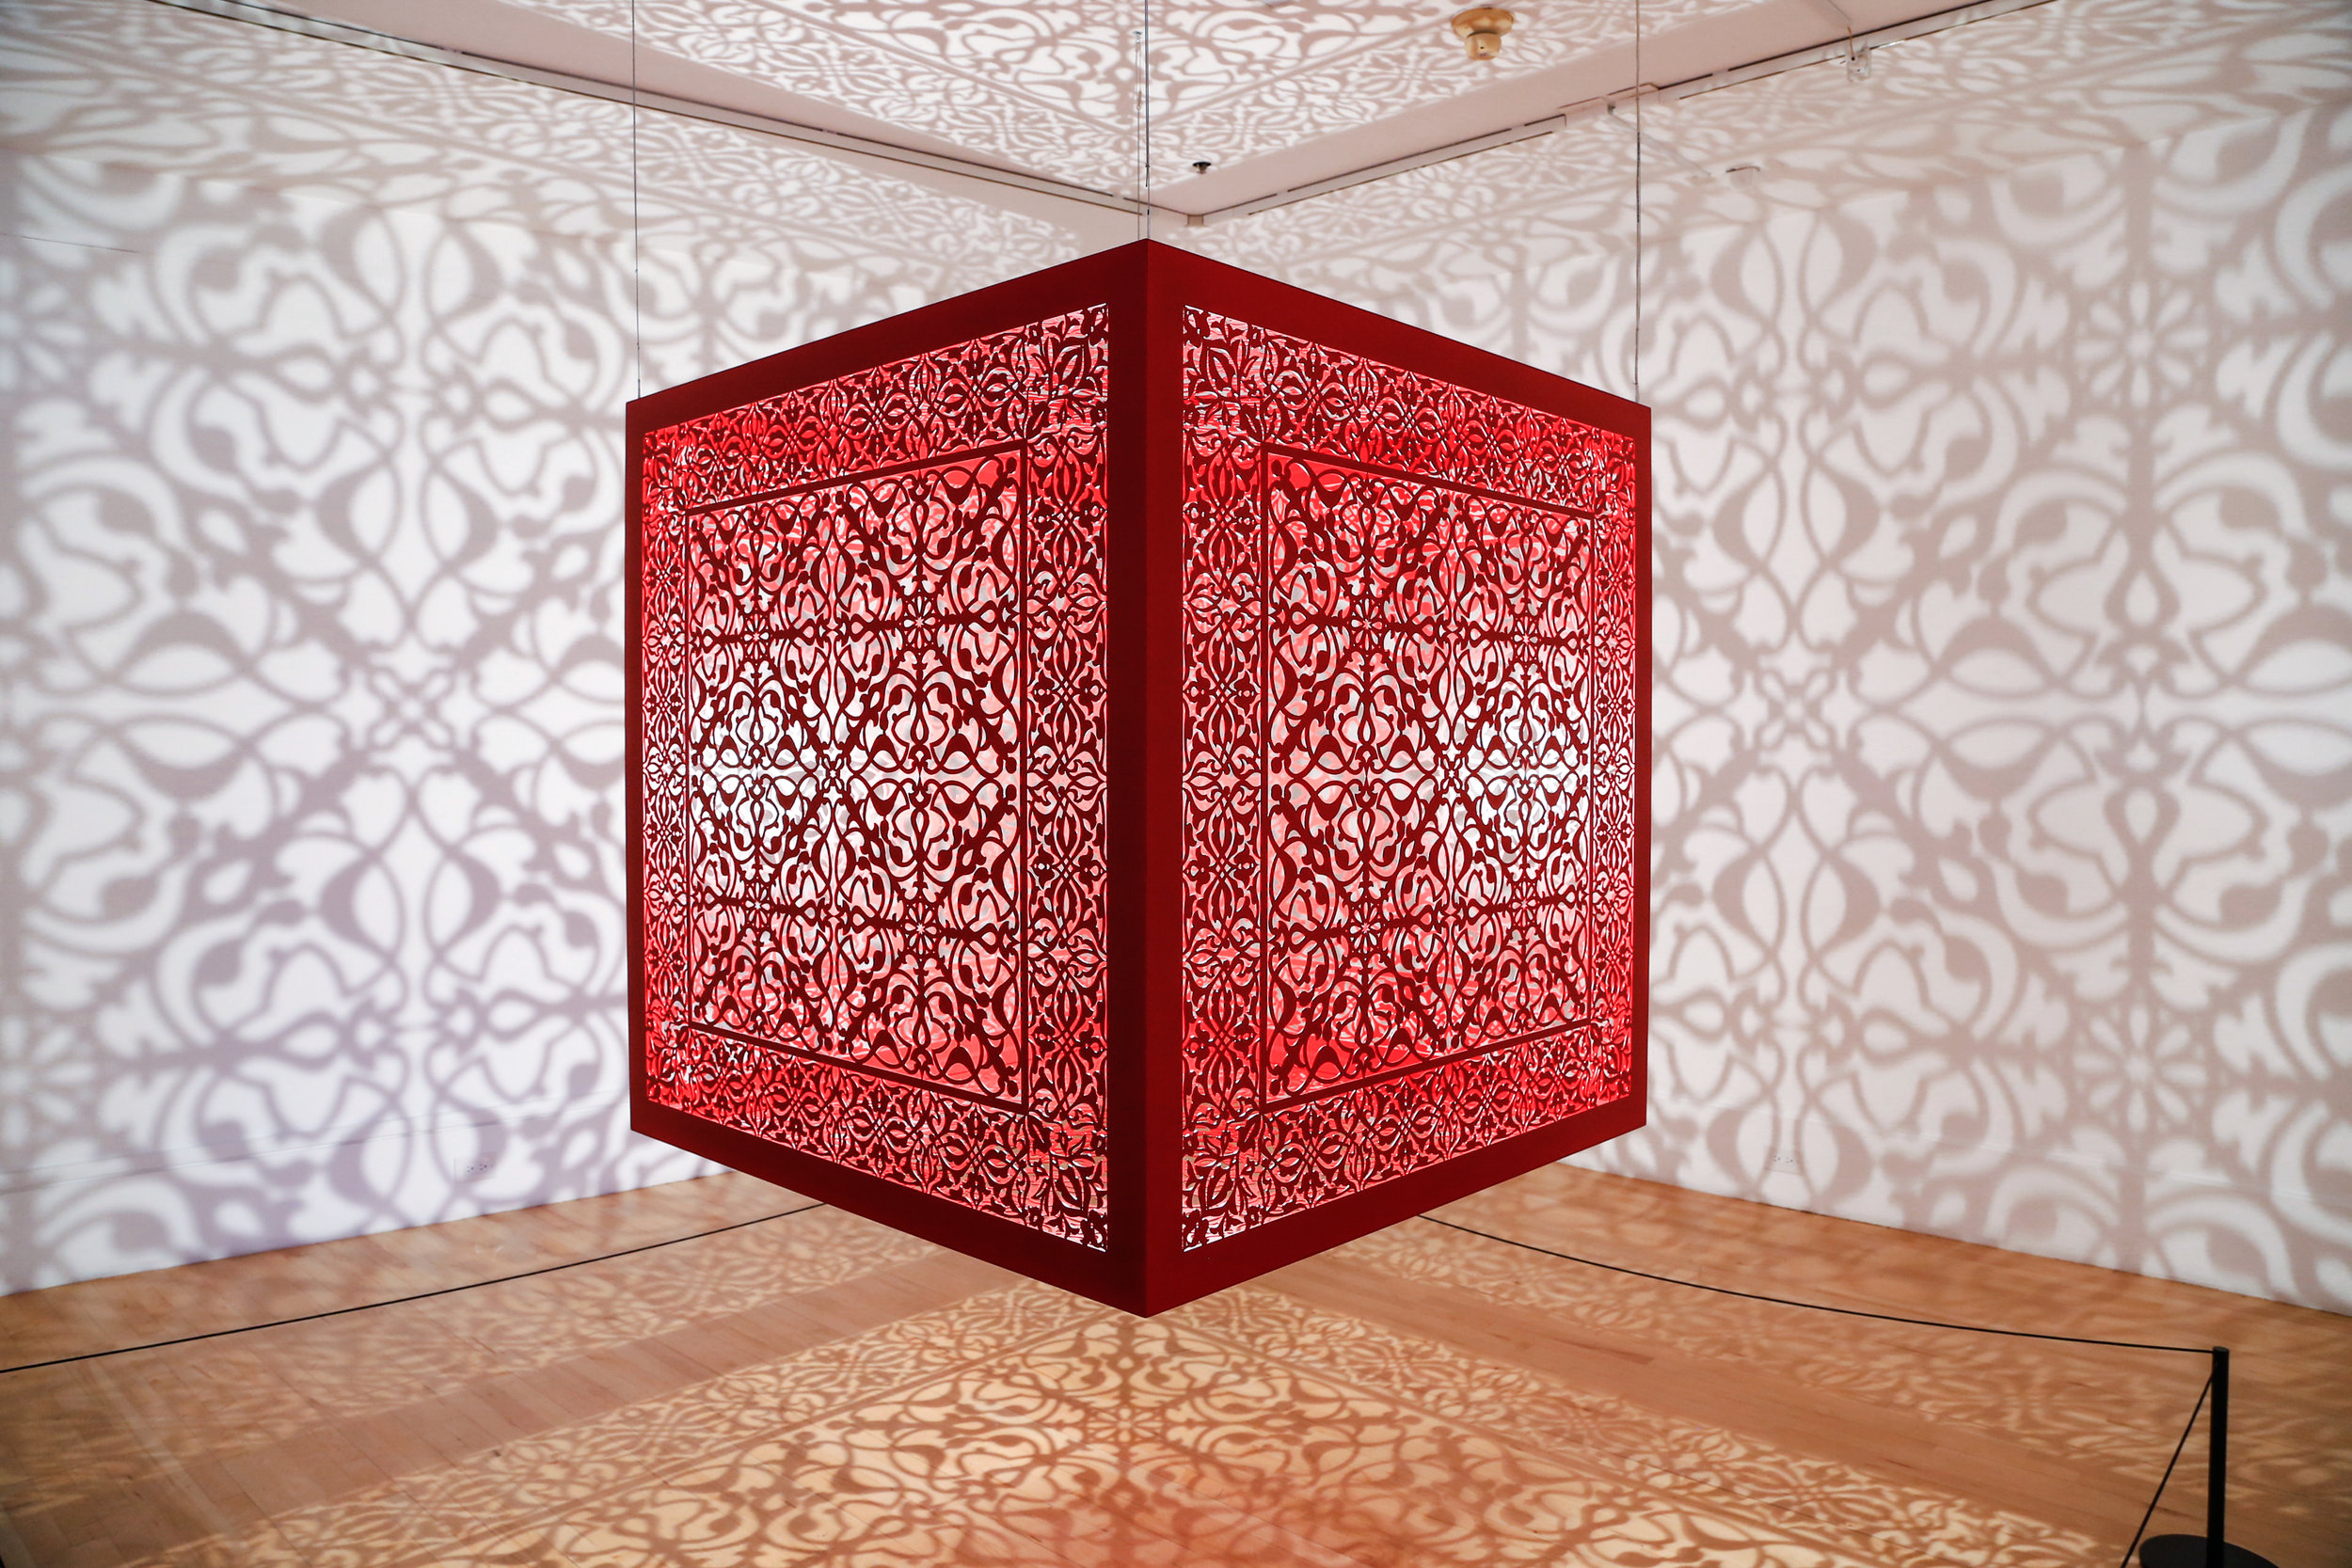 Immersive Installations by Anila Quayyum Agha Are Brought to Life with a Squarespace Portfolio Site